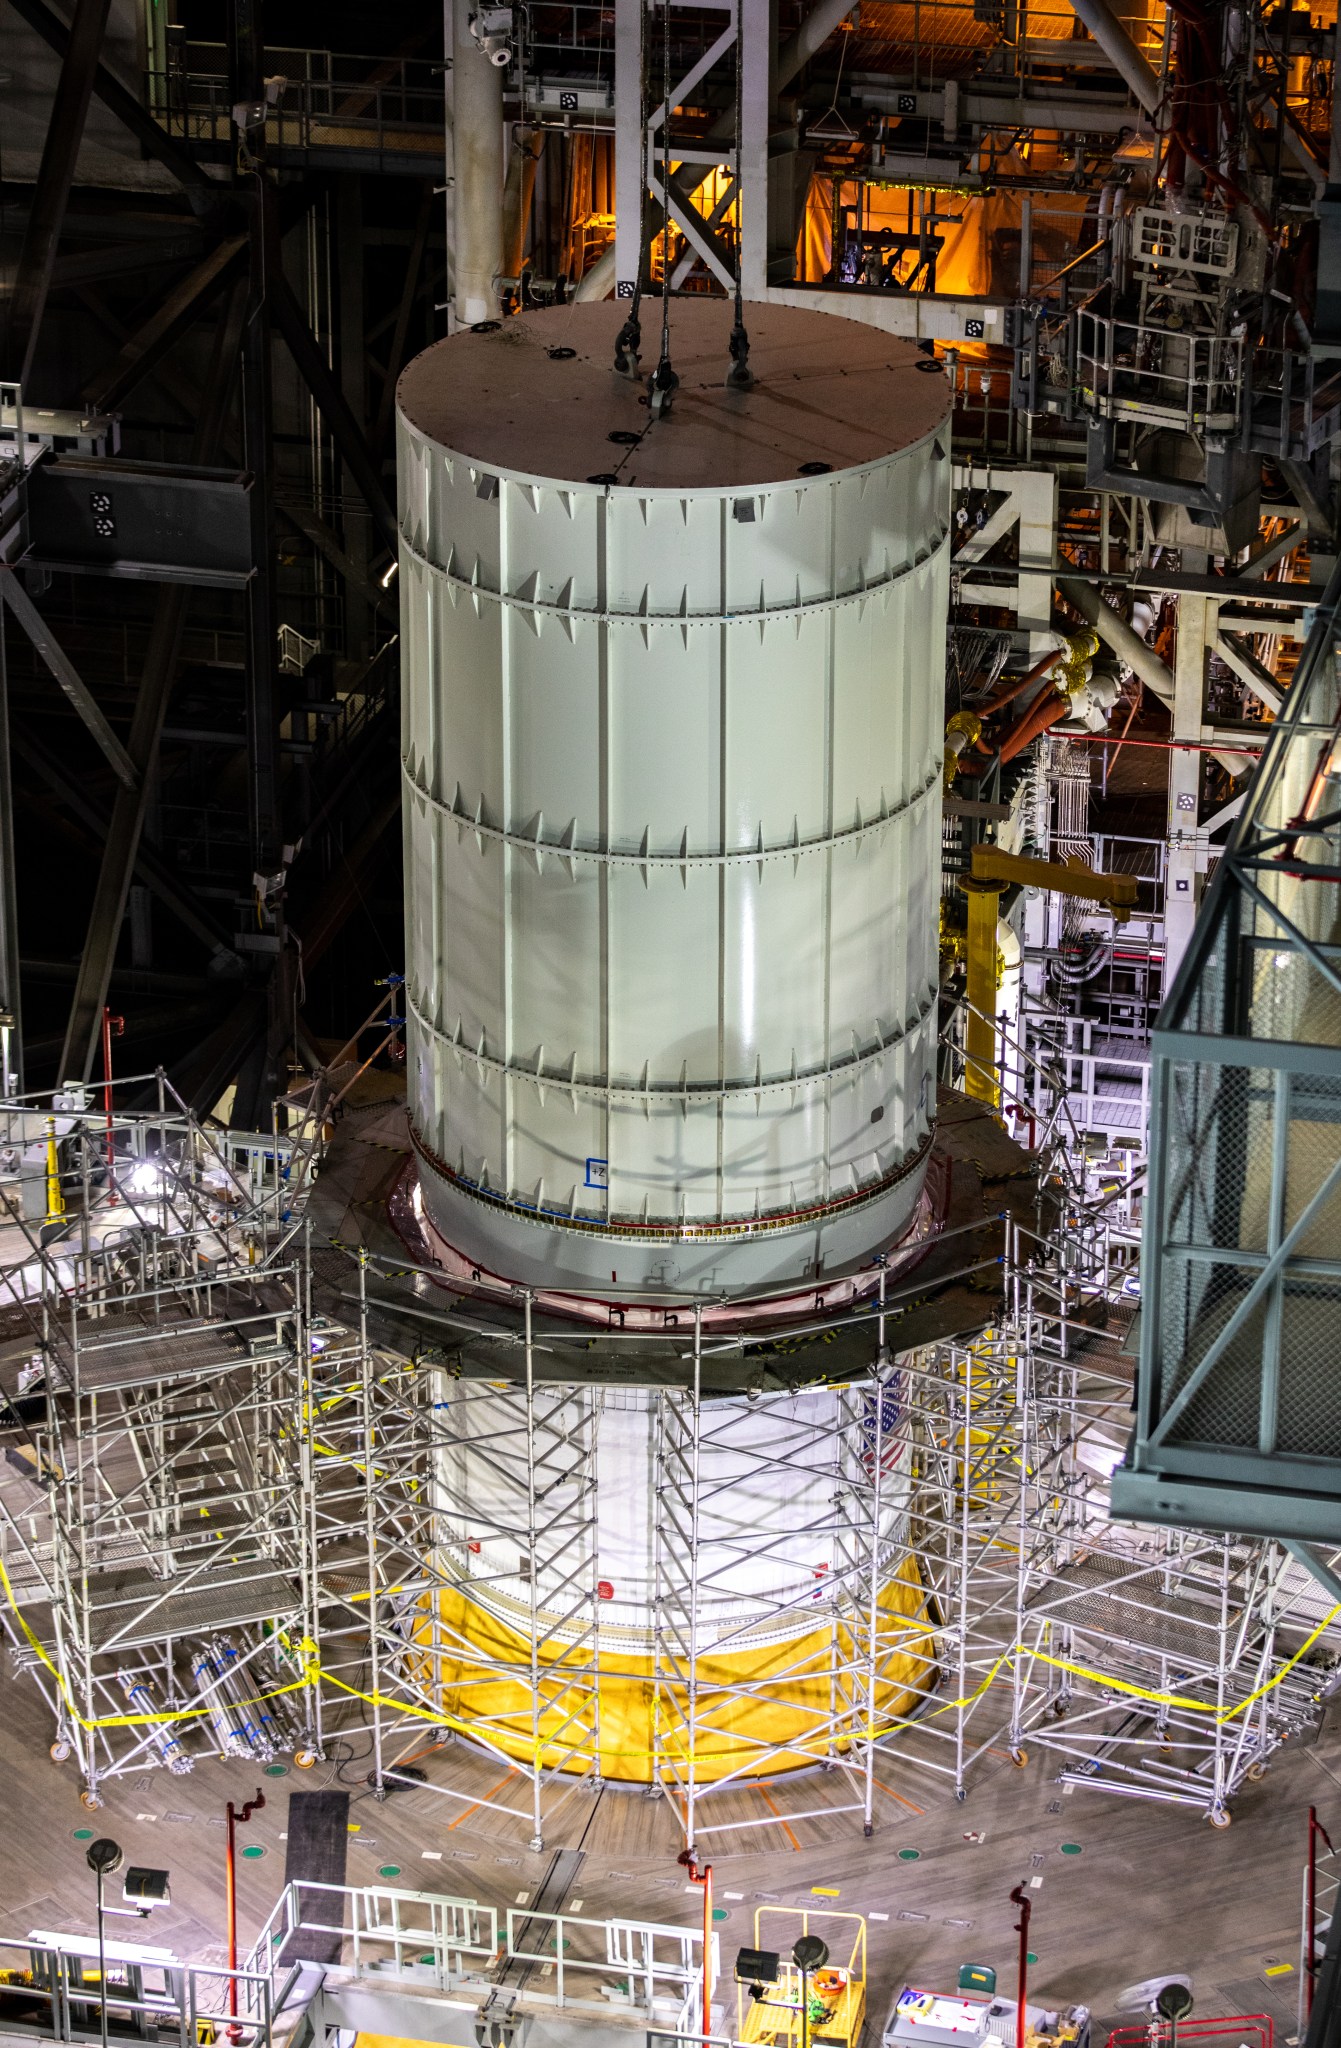 Modal testing is underway in High Bay 3 inside the Vehicle Assembly Building at NASA’s Kennedy Space Center.